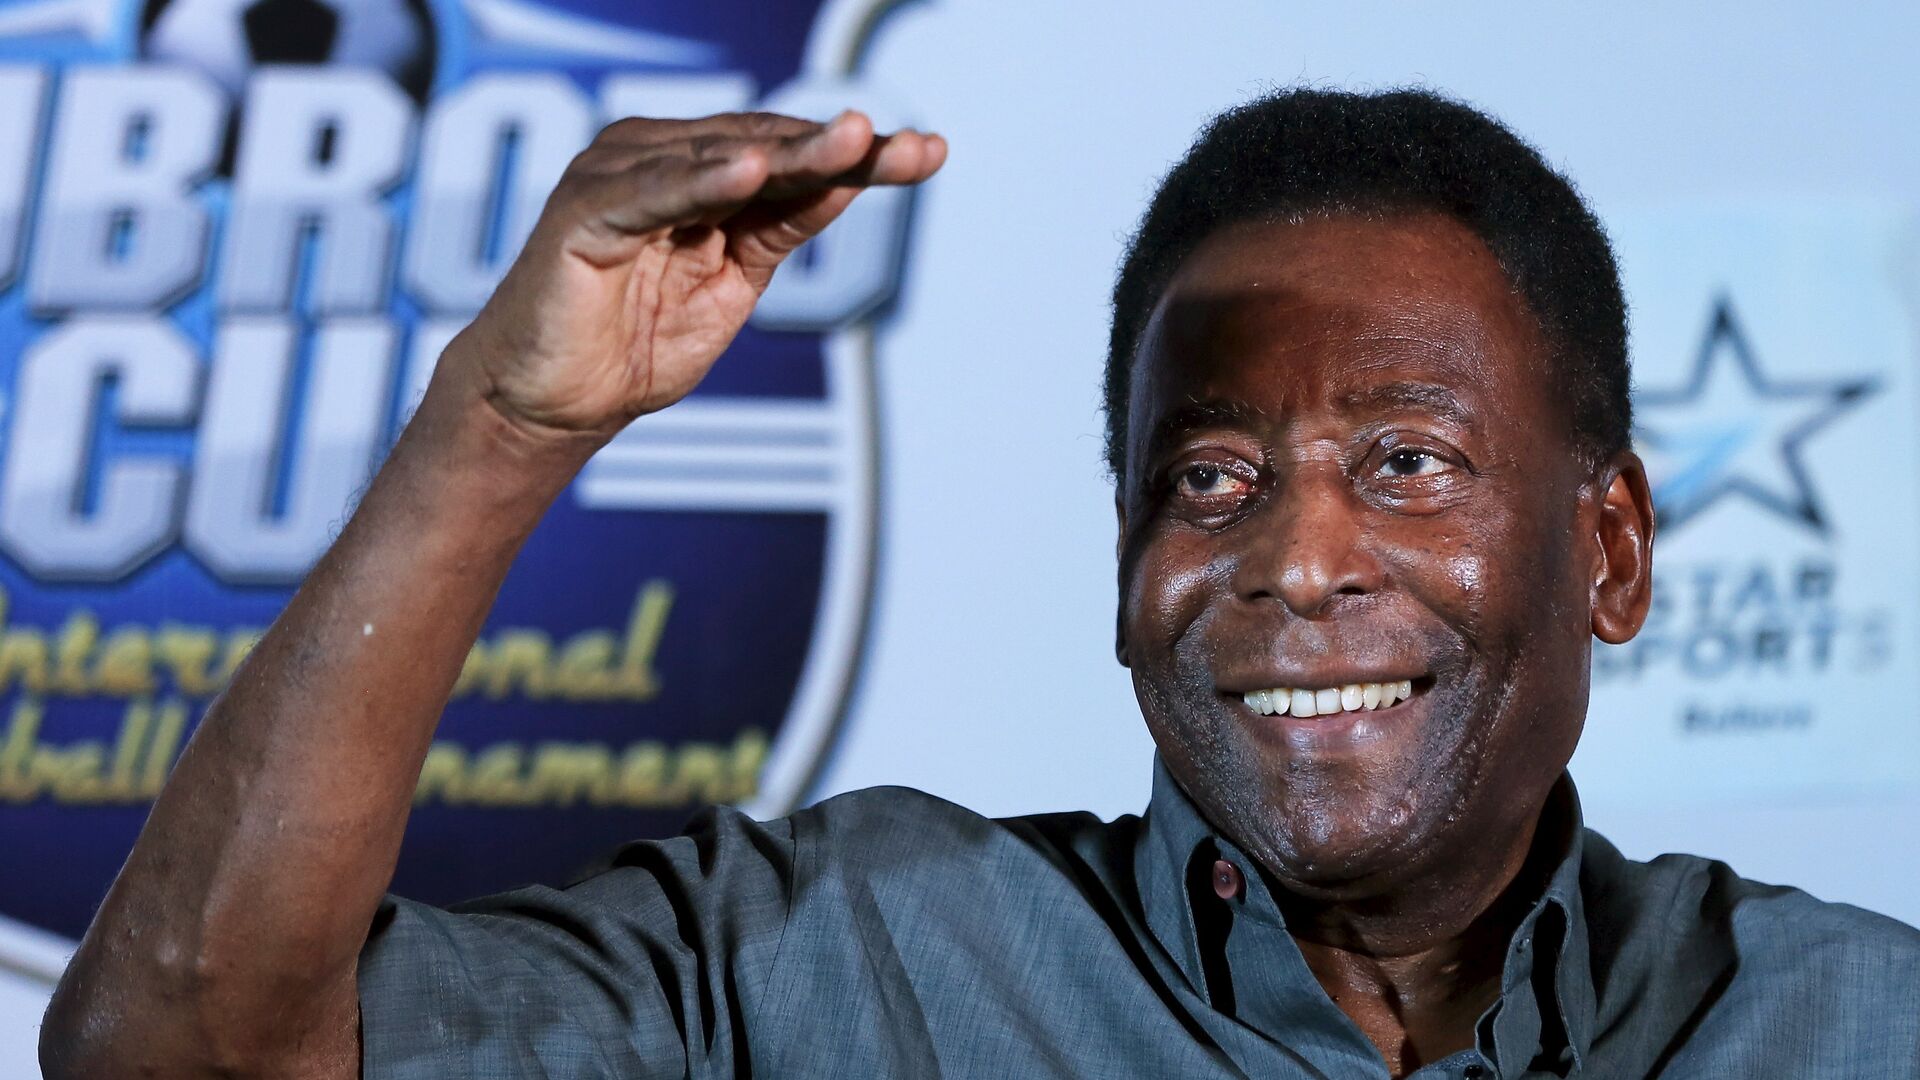 Legendary Brazilian soccer player Pele gestures during a news conference in Gurgaon on the outskirts of New Delhi, India, October 15, 2015 - اسپوتنیک افغانستان  , 1920, 11.12.2021